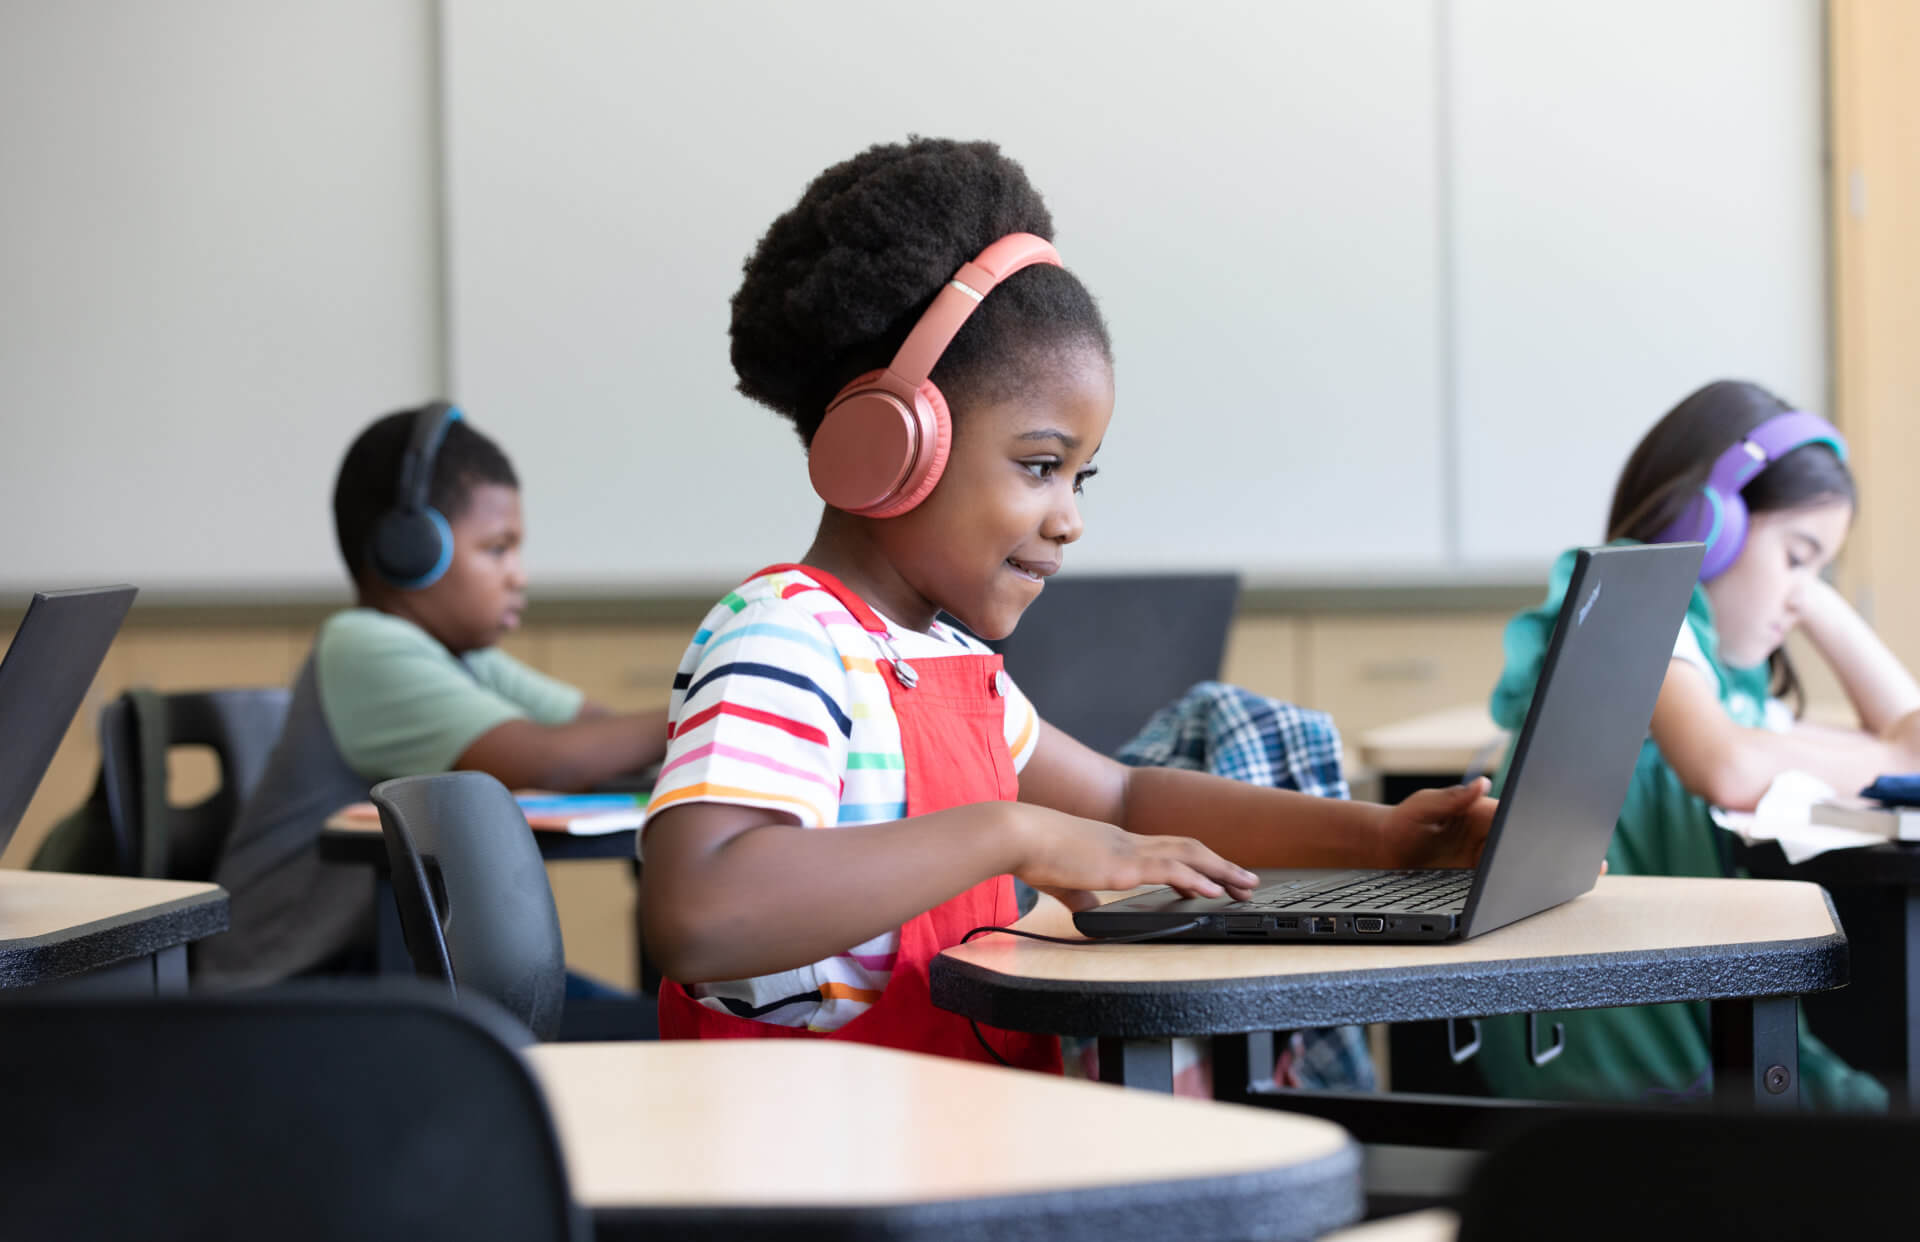 This is a decorative image showing a young girl using a laptop and headphones. 